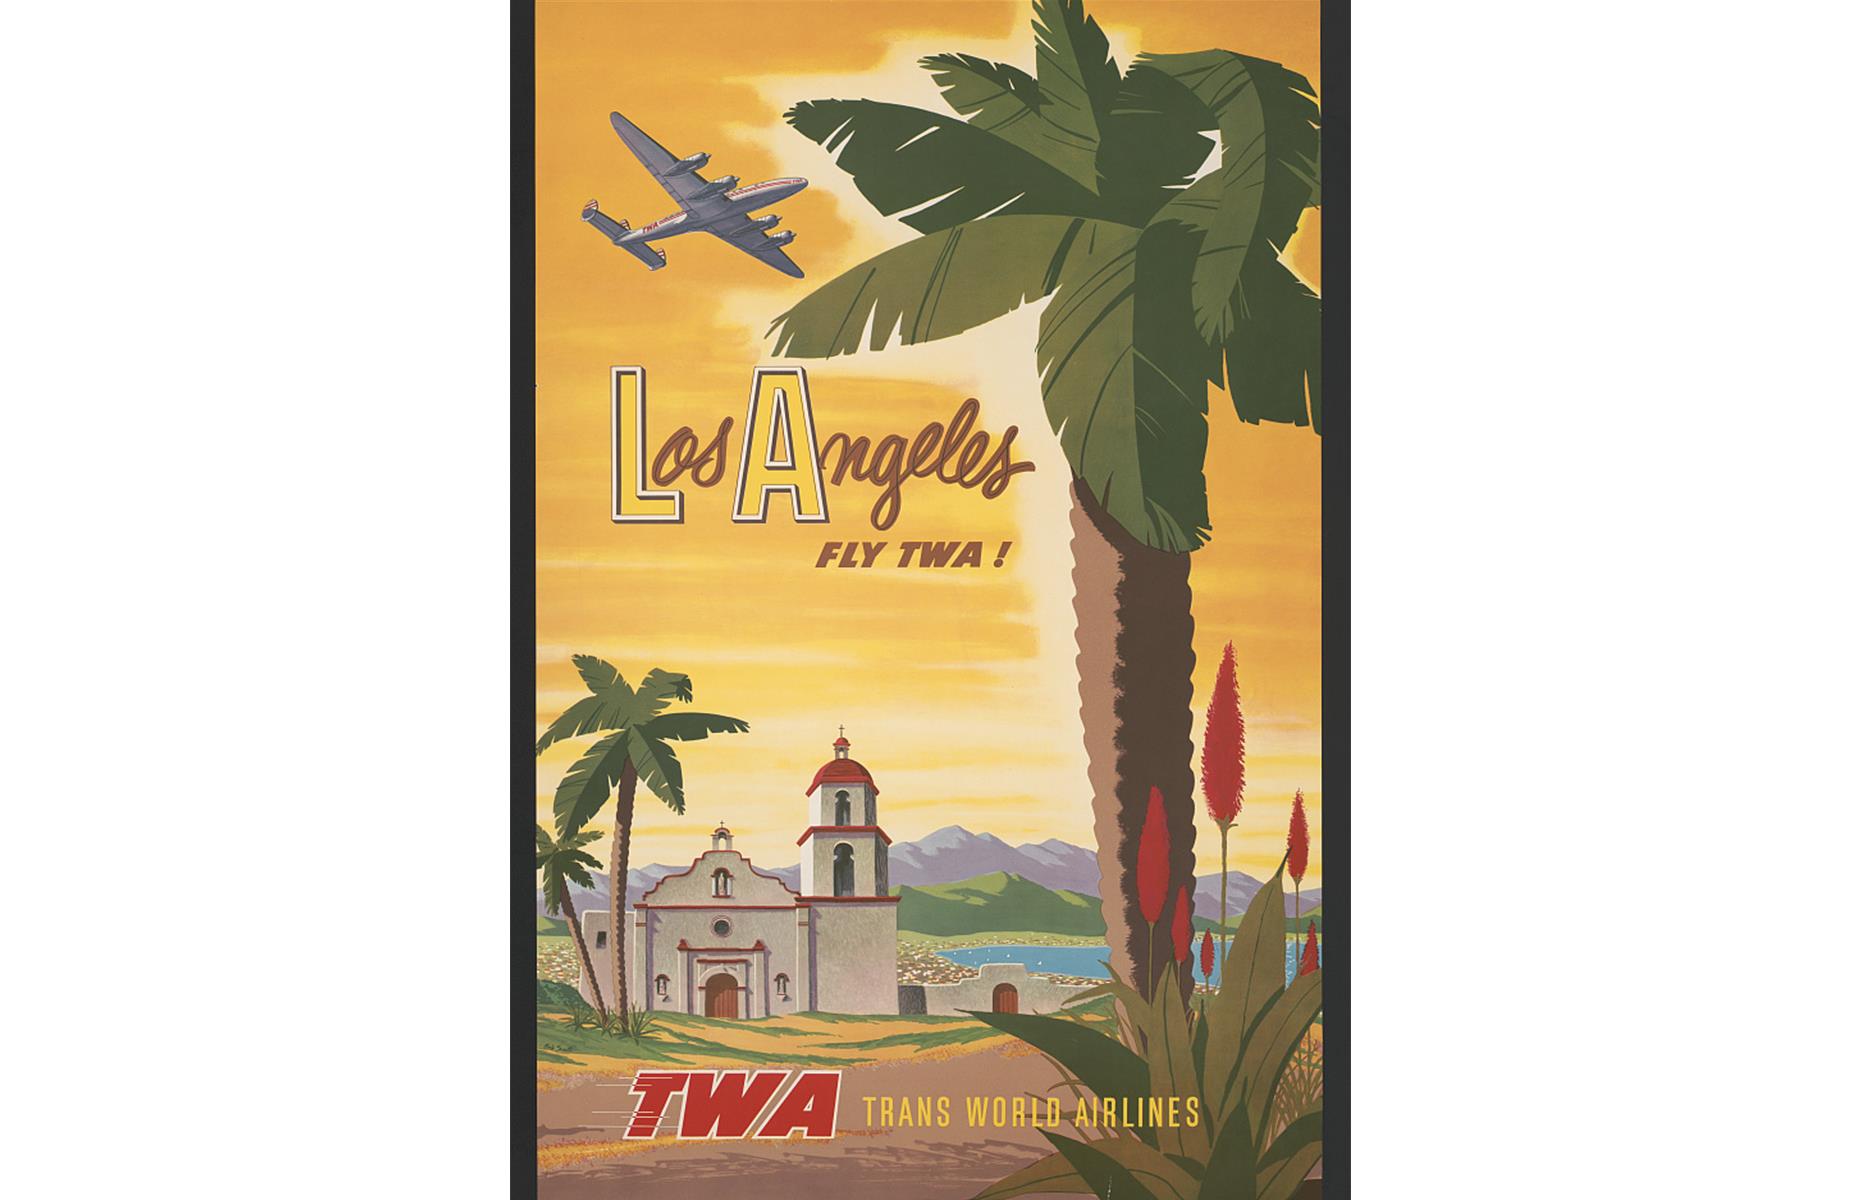 <p>TWA captures another glorious Golden State city here. This time it's promoting Los Angeles routes, with a TWA plane soaring above a classic Californian scene. Notice the golden skies, champagne sands and swaying palms, plus the striking Spanish mission. The poster dates to the 1950s. </p>  <p><a href="https://www.loveexploring.com/galleries/106621/californias-most-beautiful-small-towns-and-cities?page=1"><strong>Take a look at California's most beautiful small towns and cities</strong></a></p>